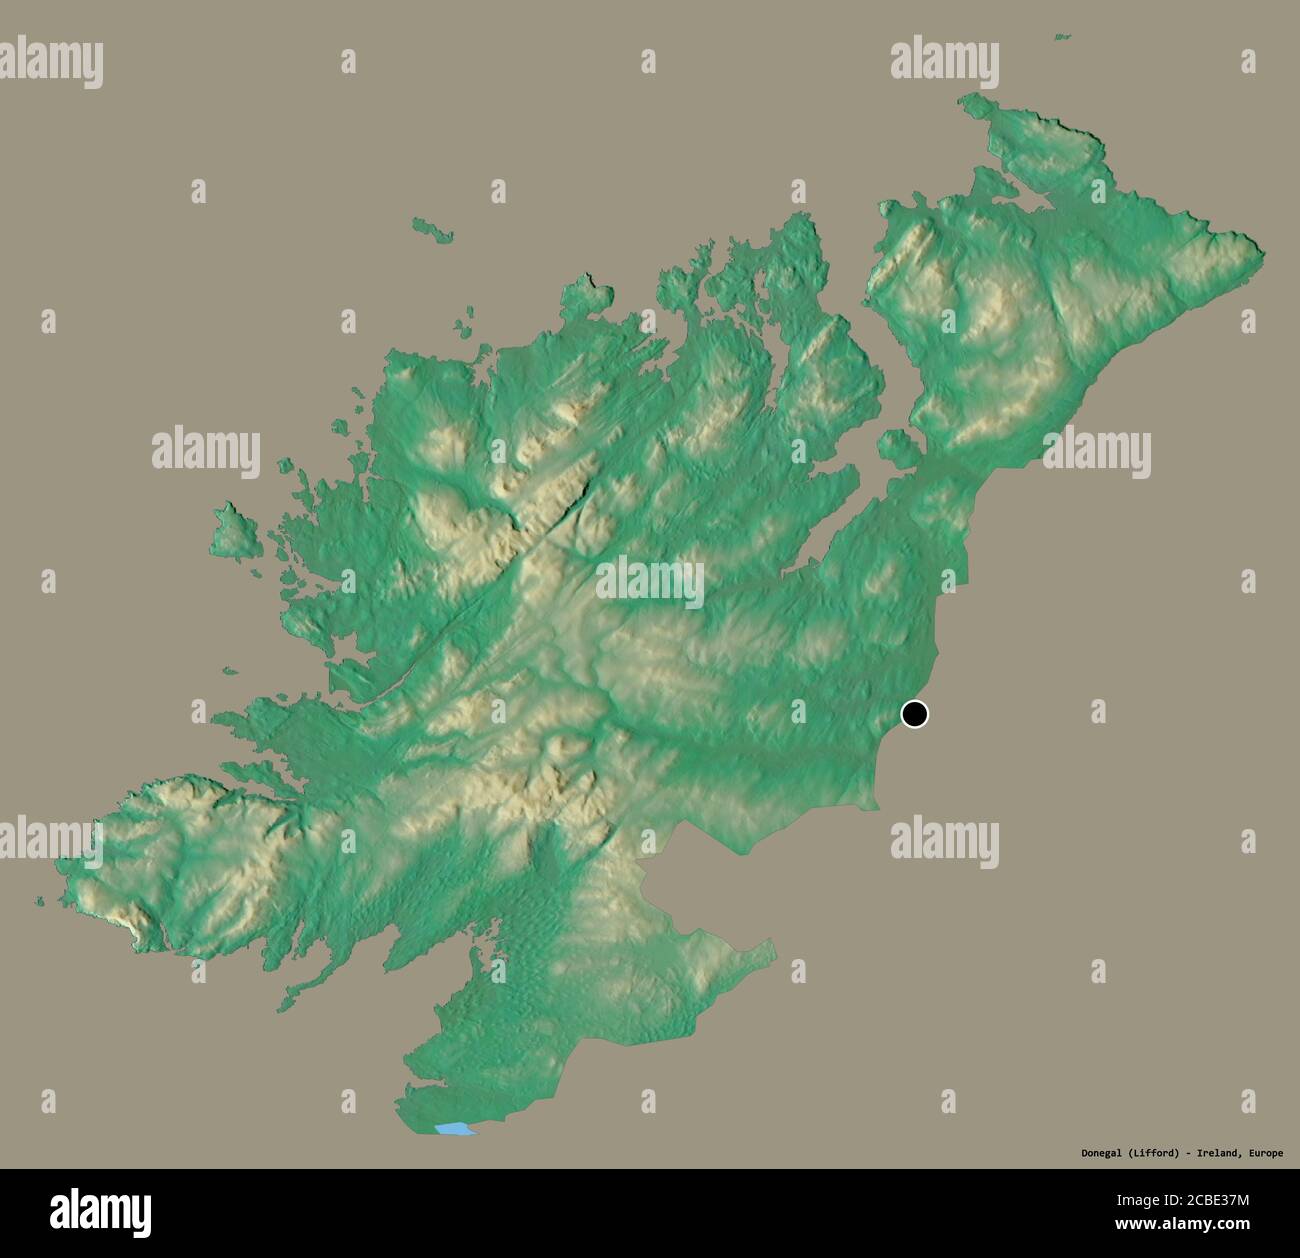 Shape of Donegal, county of Ireland, with its capital isolated on a solid color background. Topographic relief map. 3D rendering Stock Photo